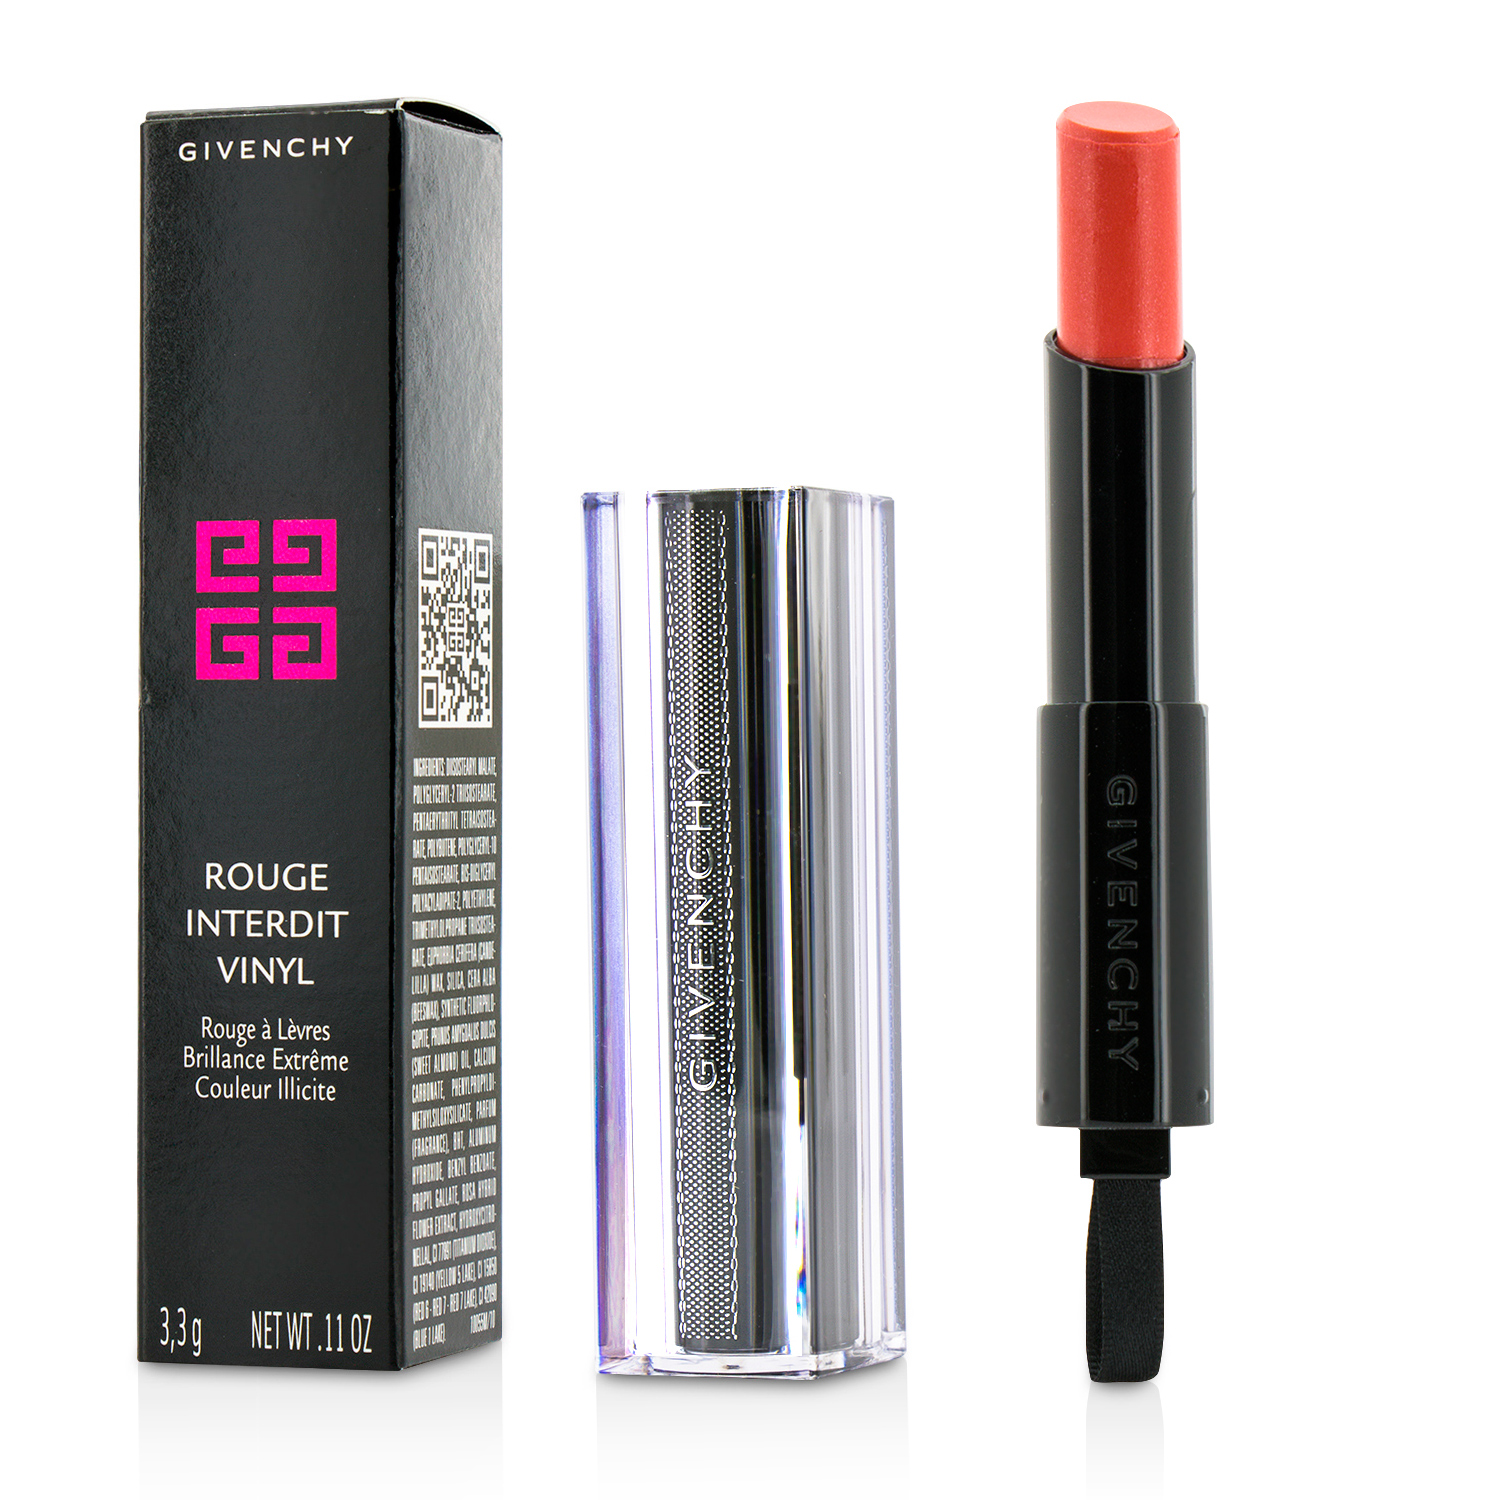 Rouge Interdit Vinyl Extreme Shine Lipstick - # 09 Corail Redoutable Givenchy Image